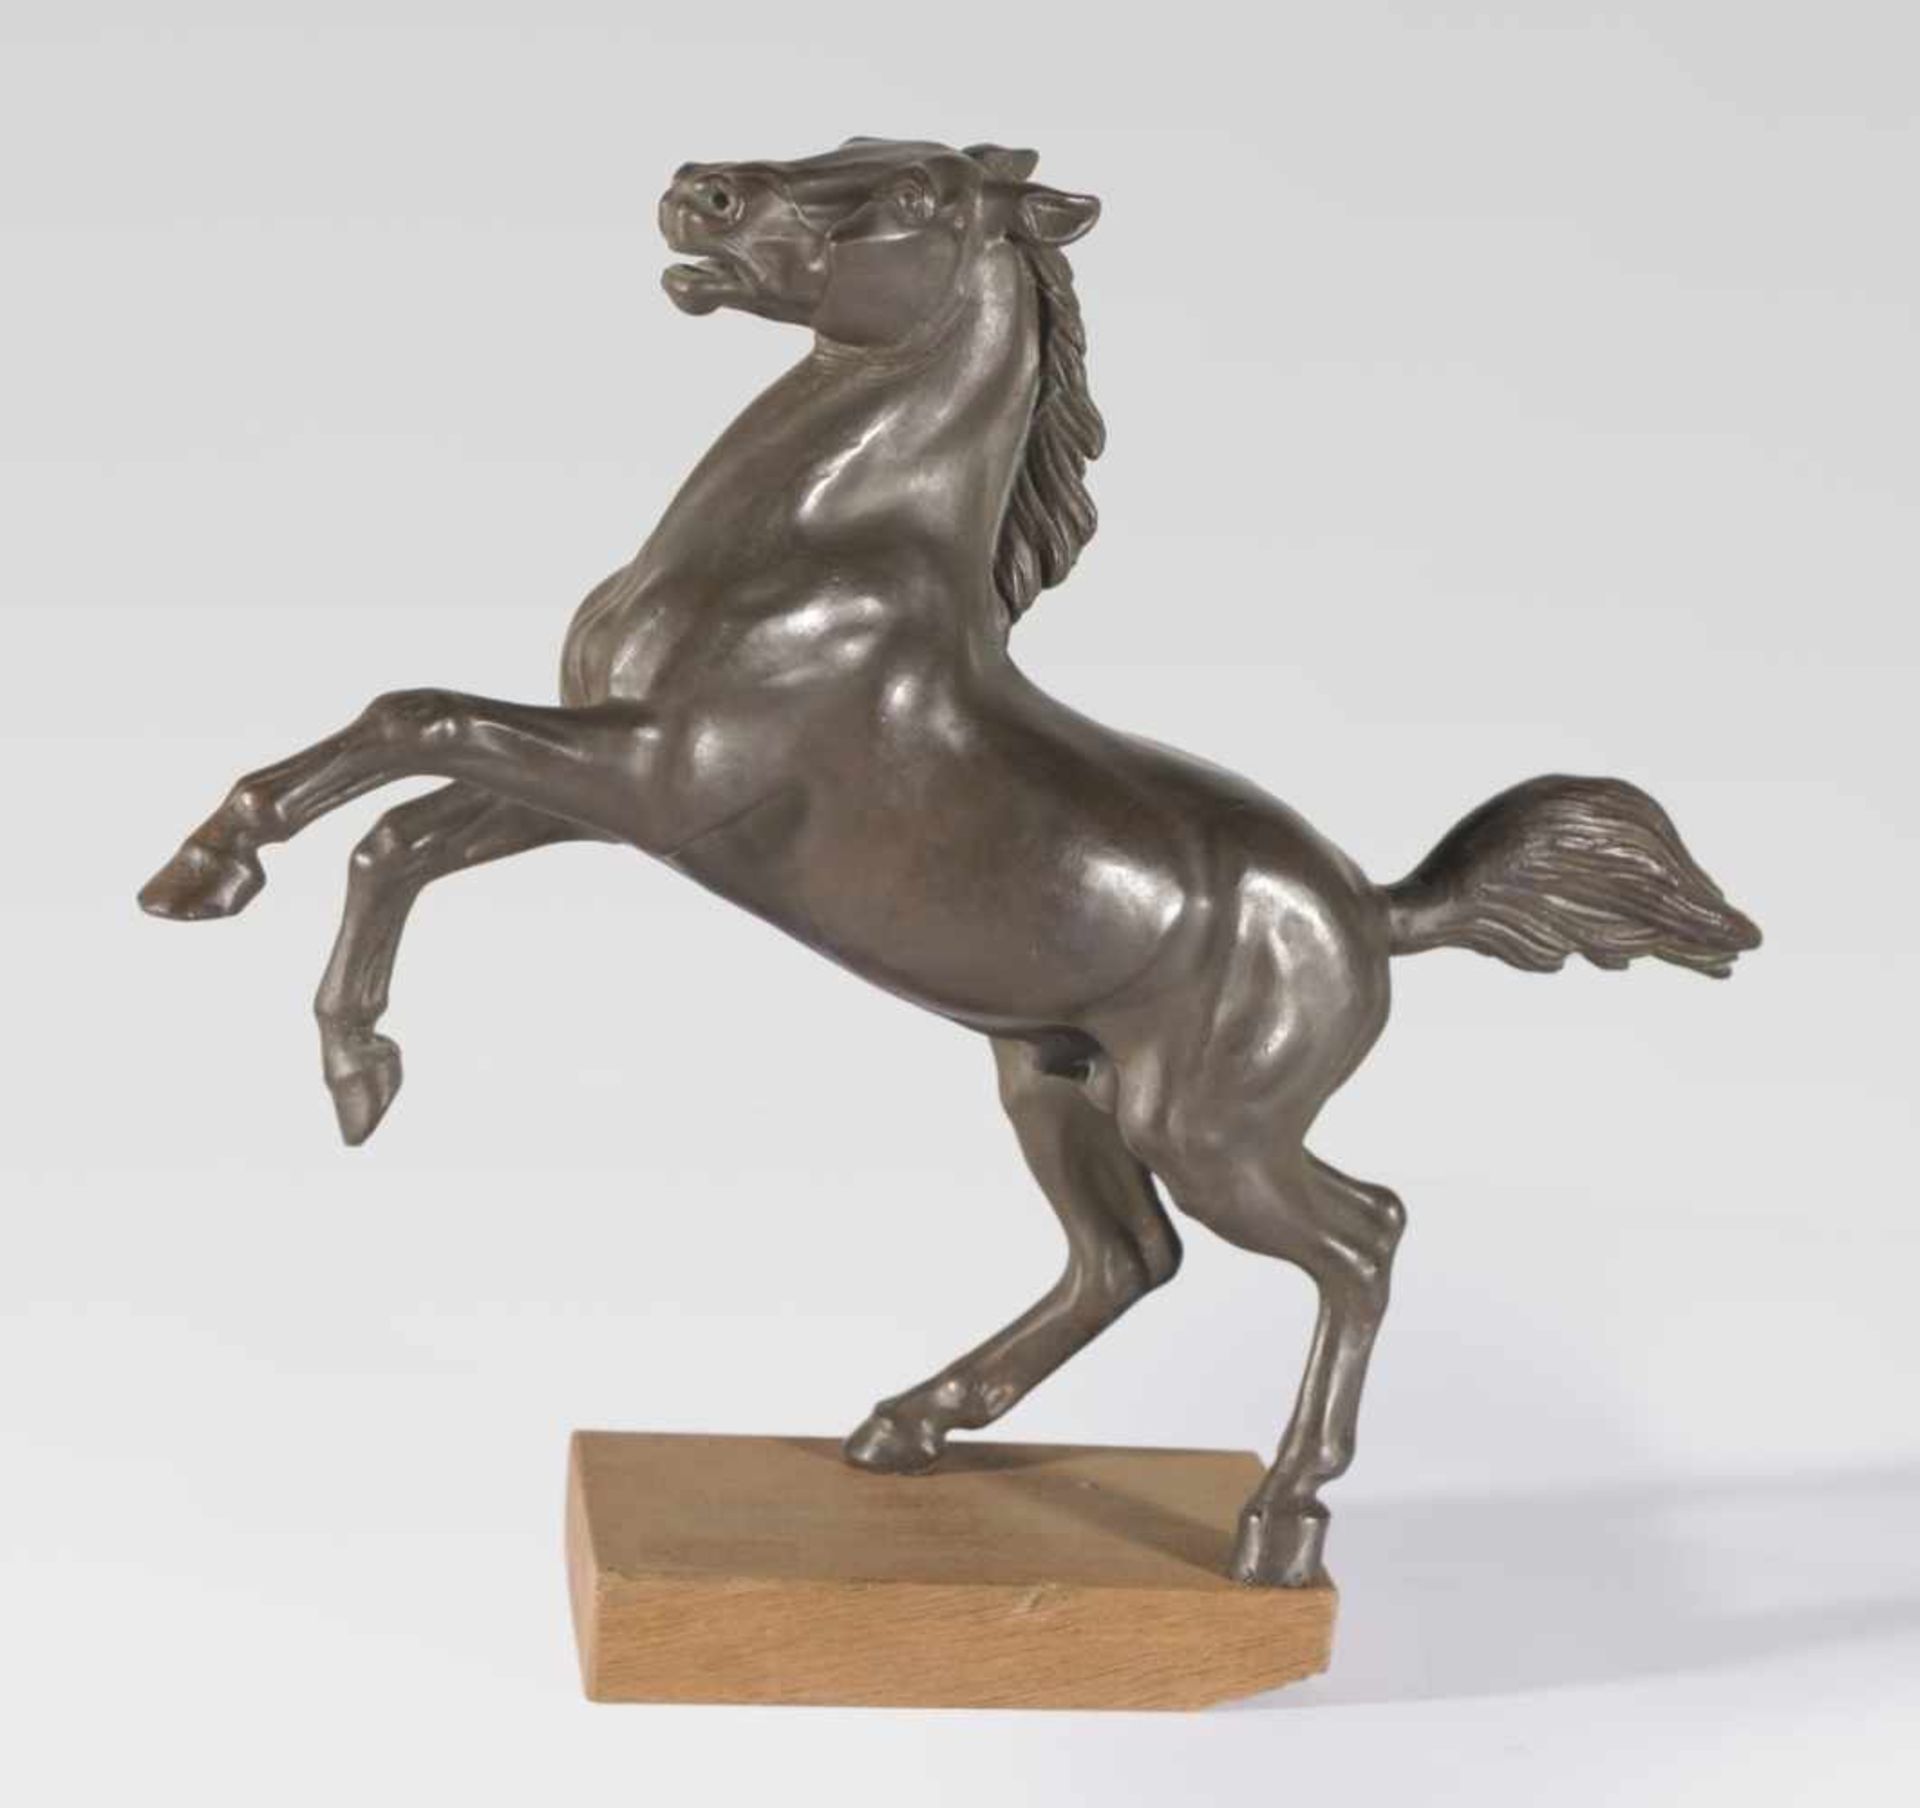 A rearing horse, Bronze, probably around 1900, 40 cm high (without the wooden pedestal),